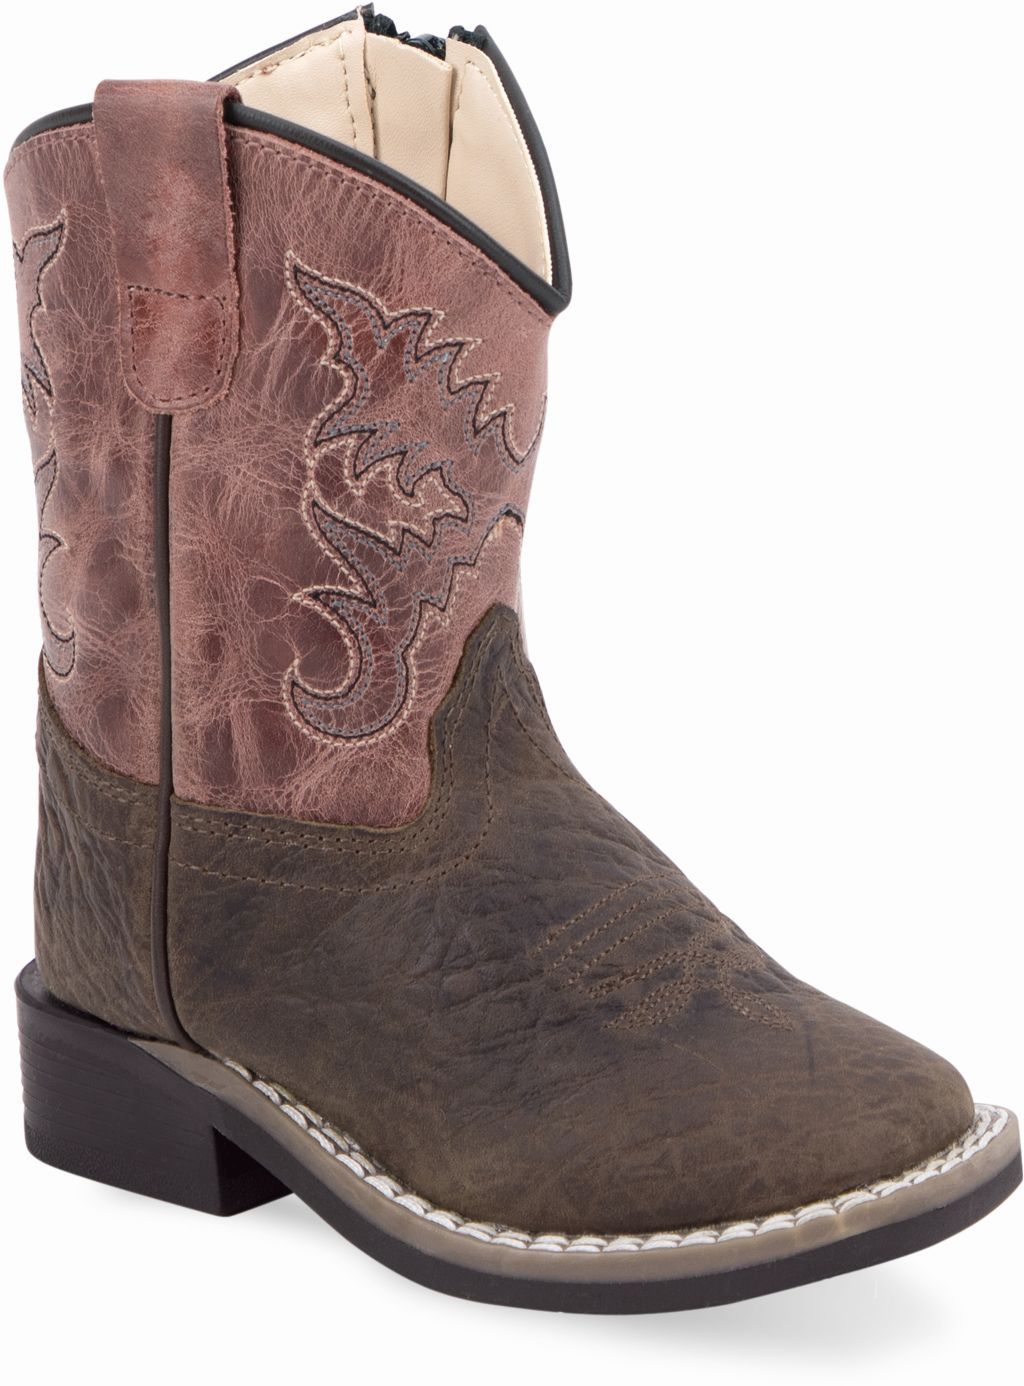 Old West Dark Brown Bull Hide Print Foot Light Pink Cactus Shaft Toddler's Broad Square Toe Boots